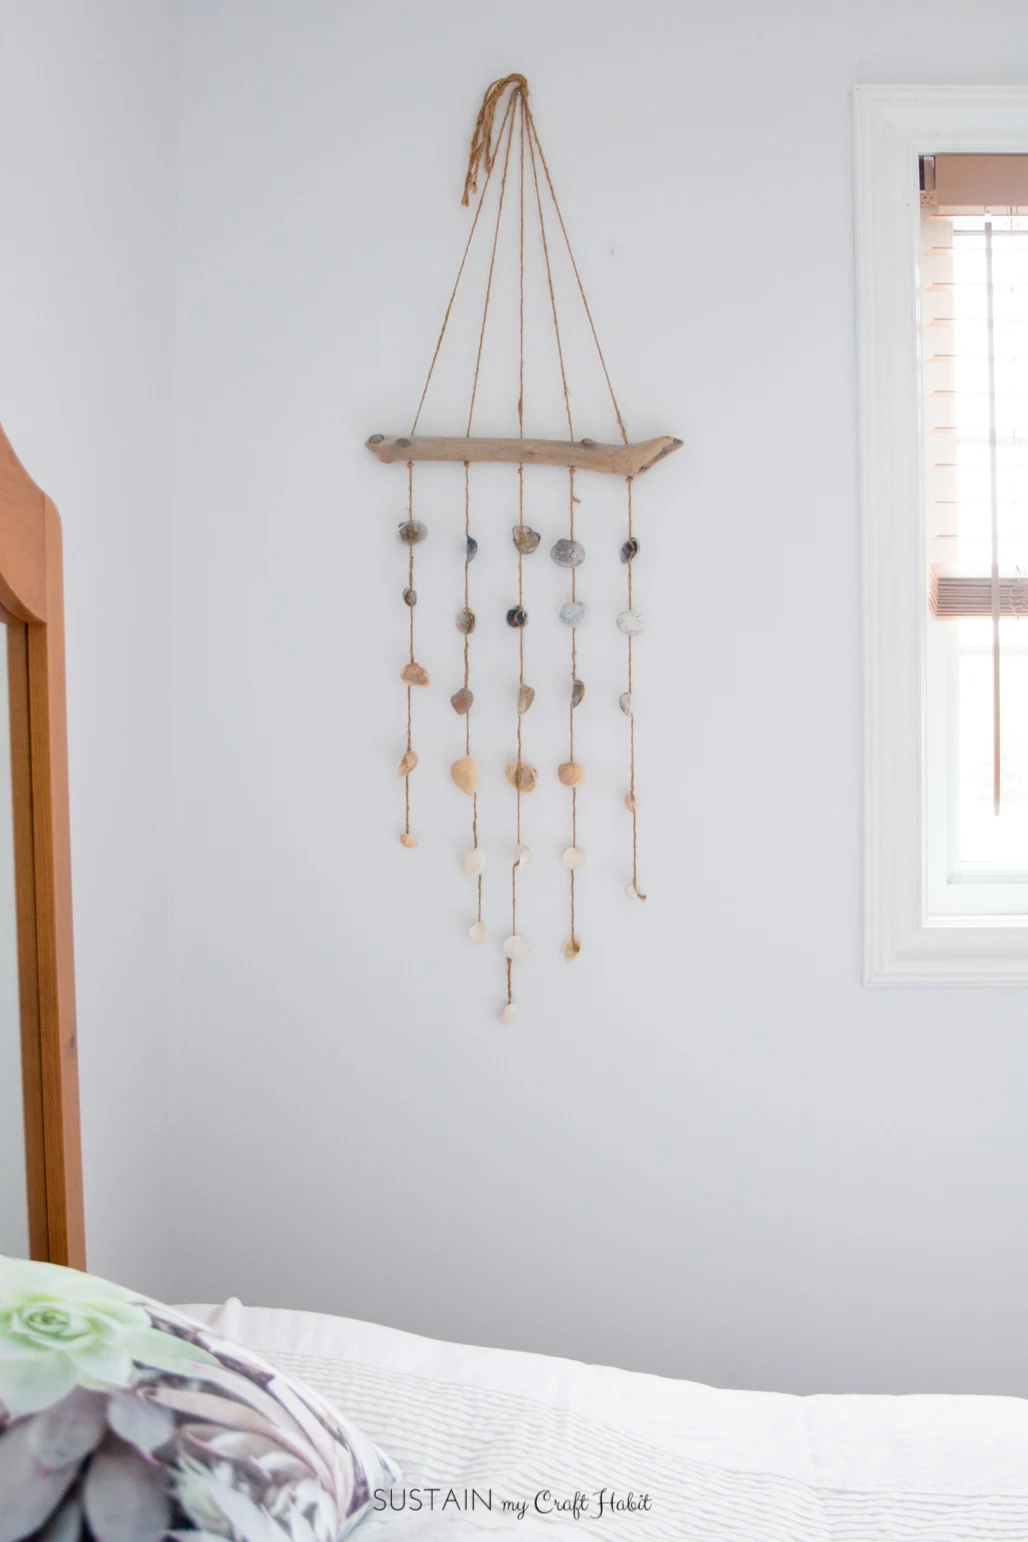 This seashell wind chime is so easy to make and can be used indoors as a coastal cottage décor idea for your bedroom wall.